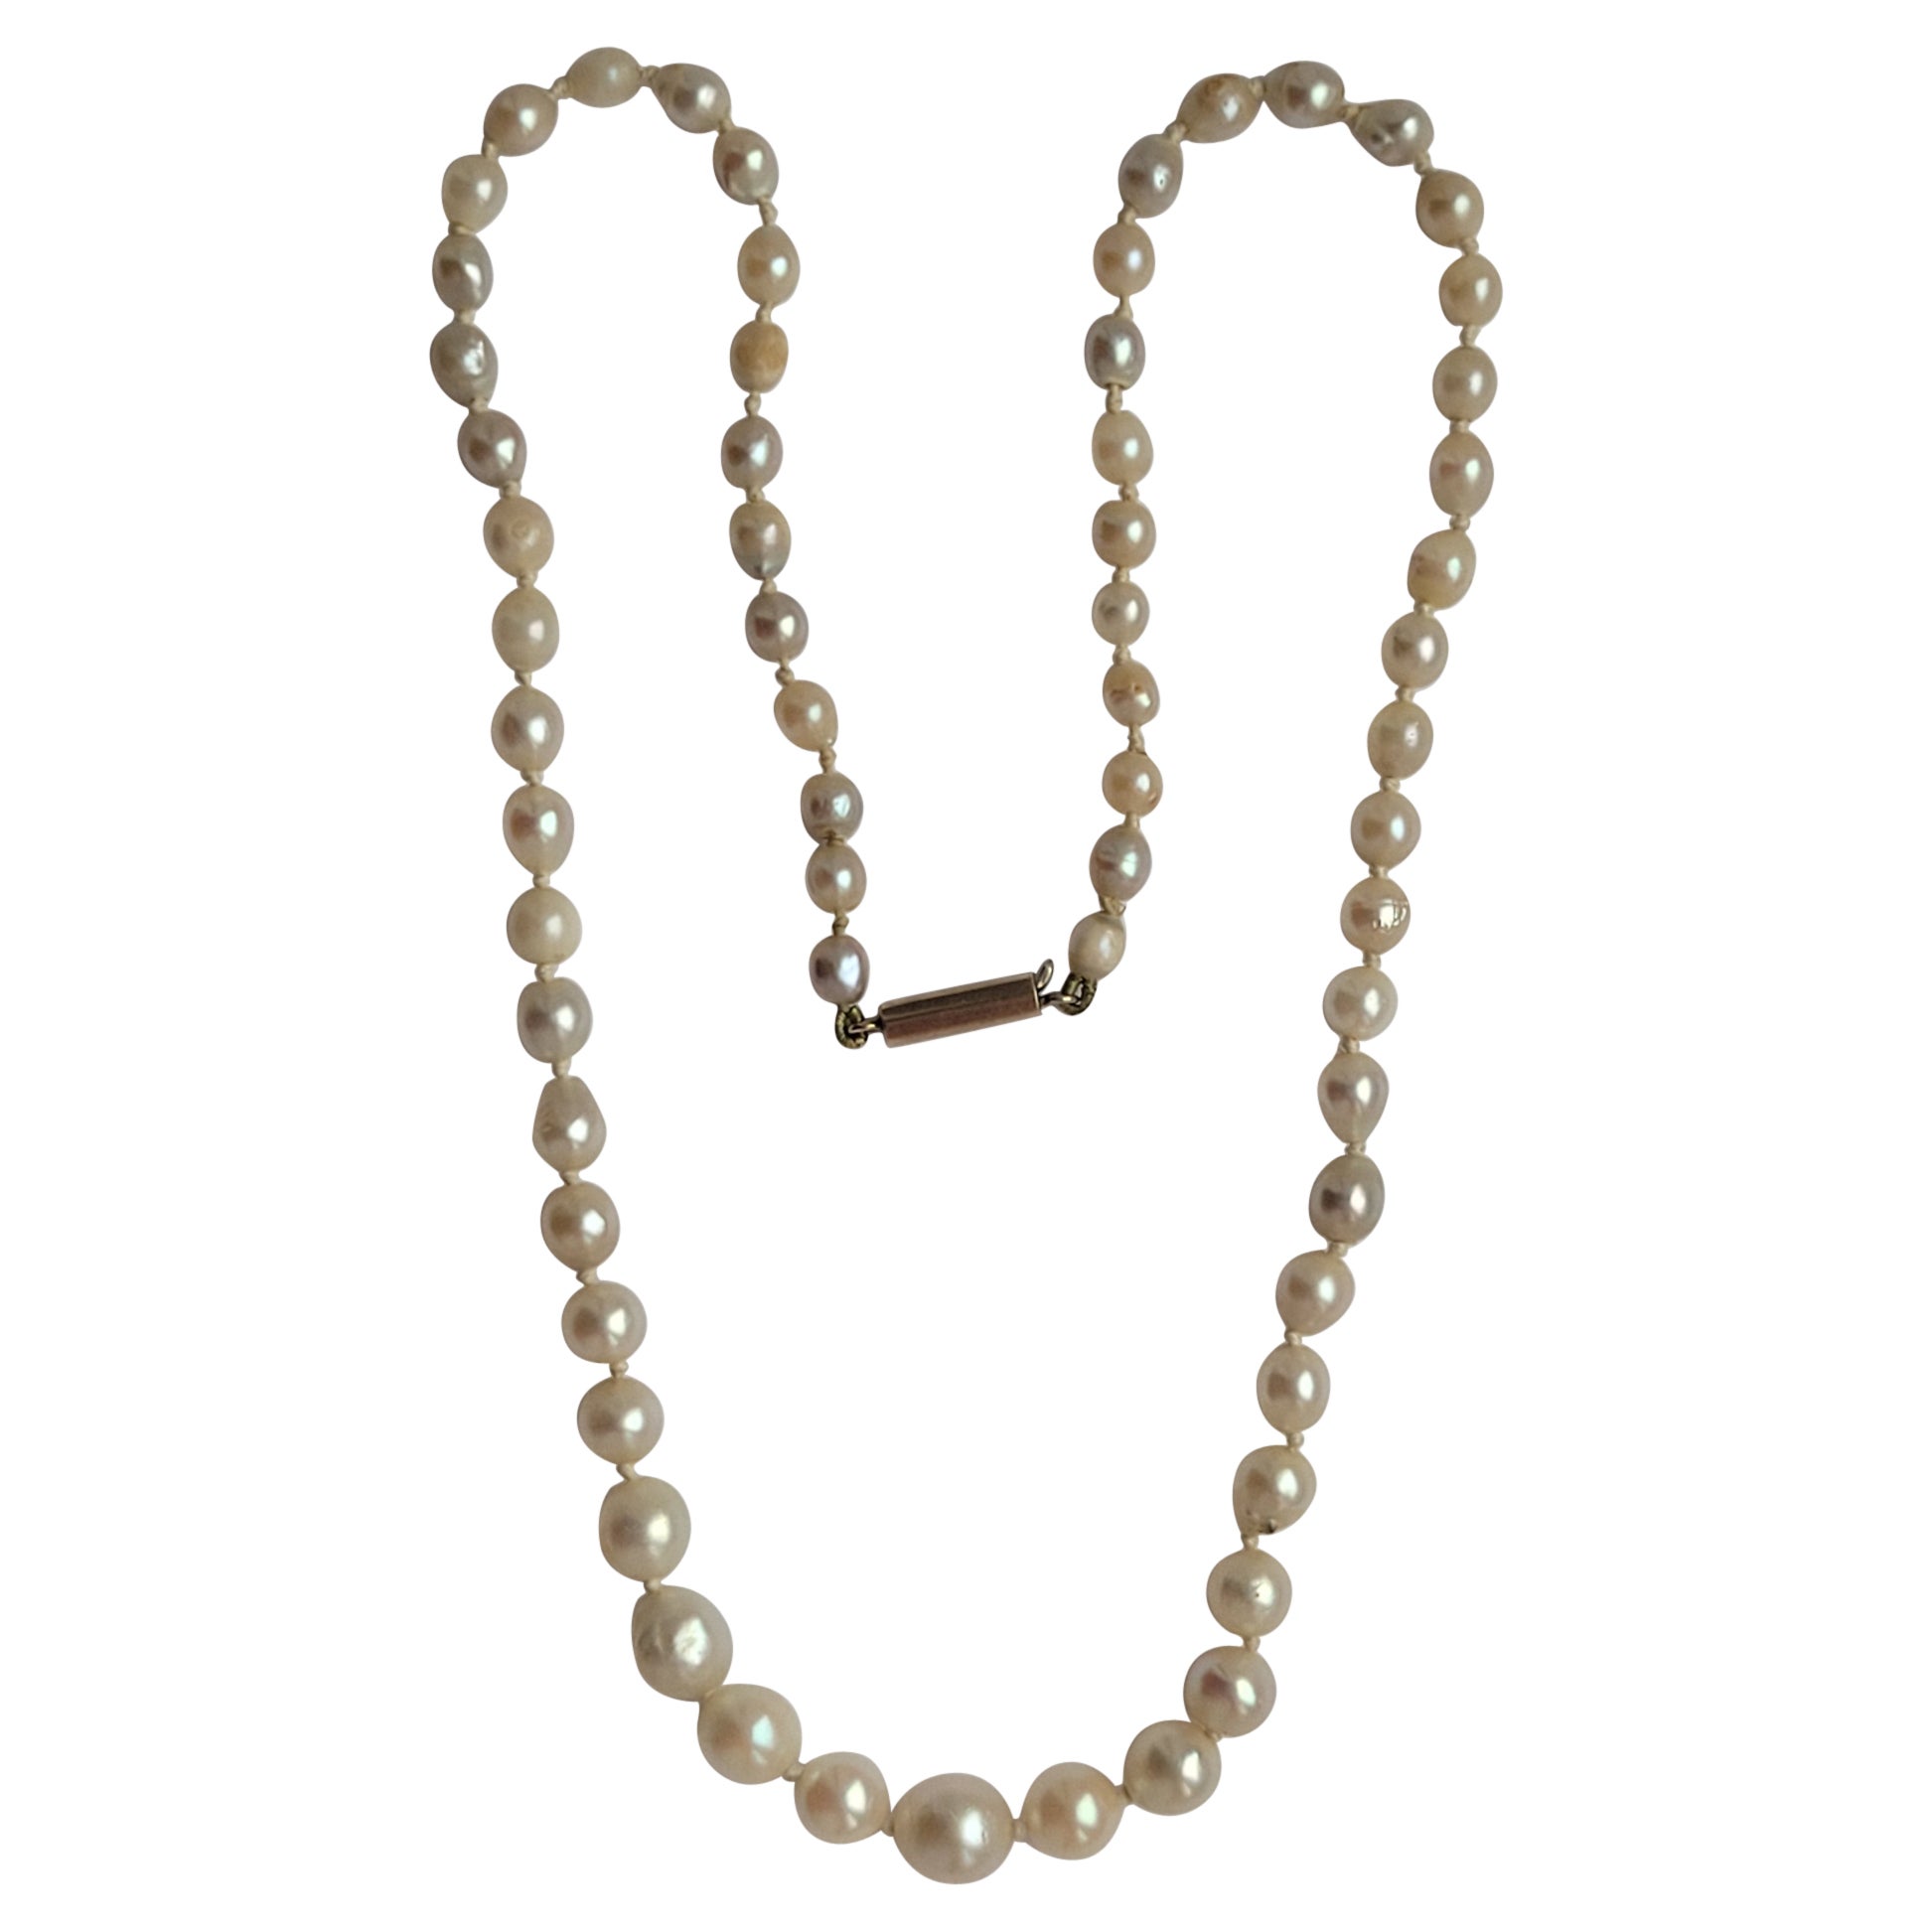 Antique Edwardian Cultured Pearl necklace